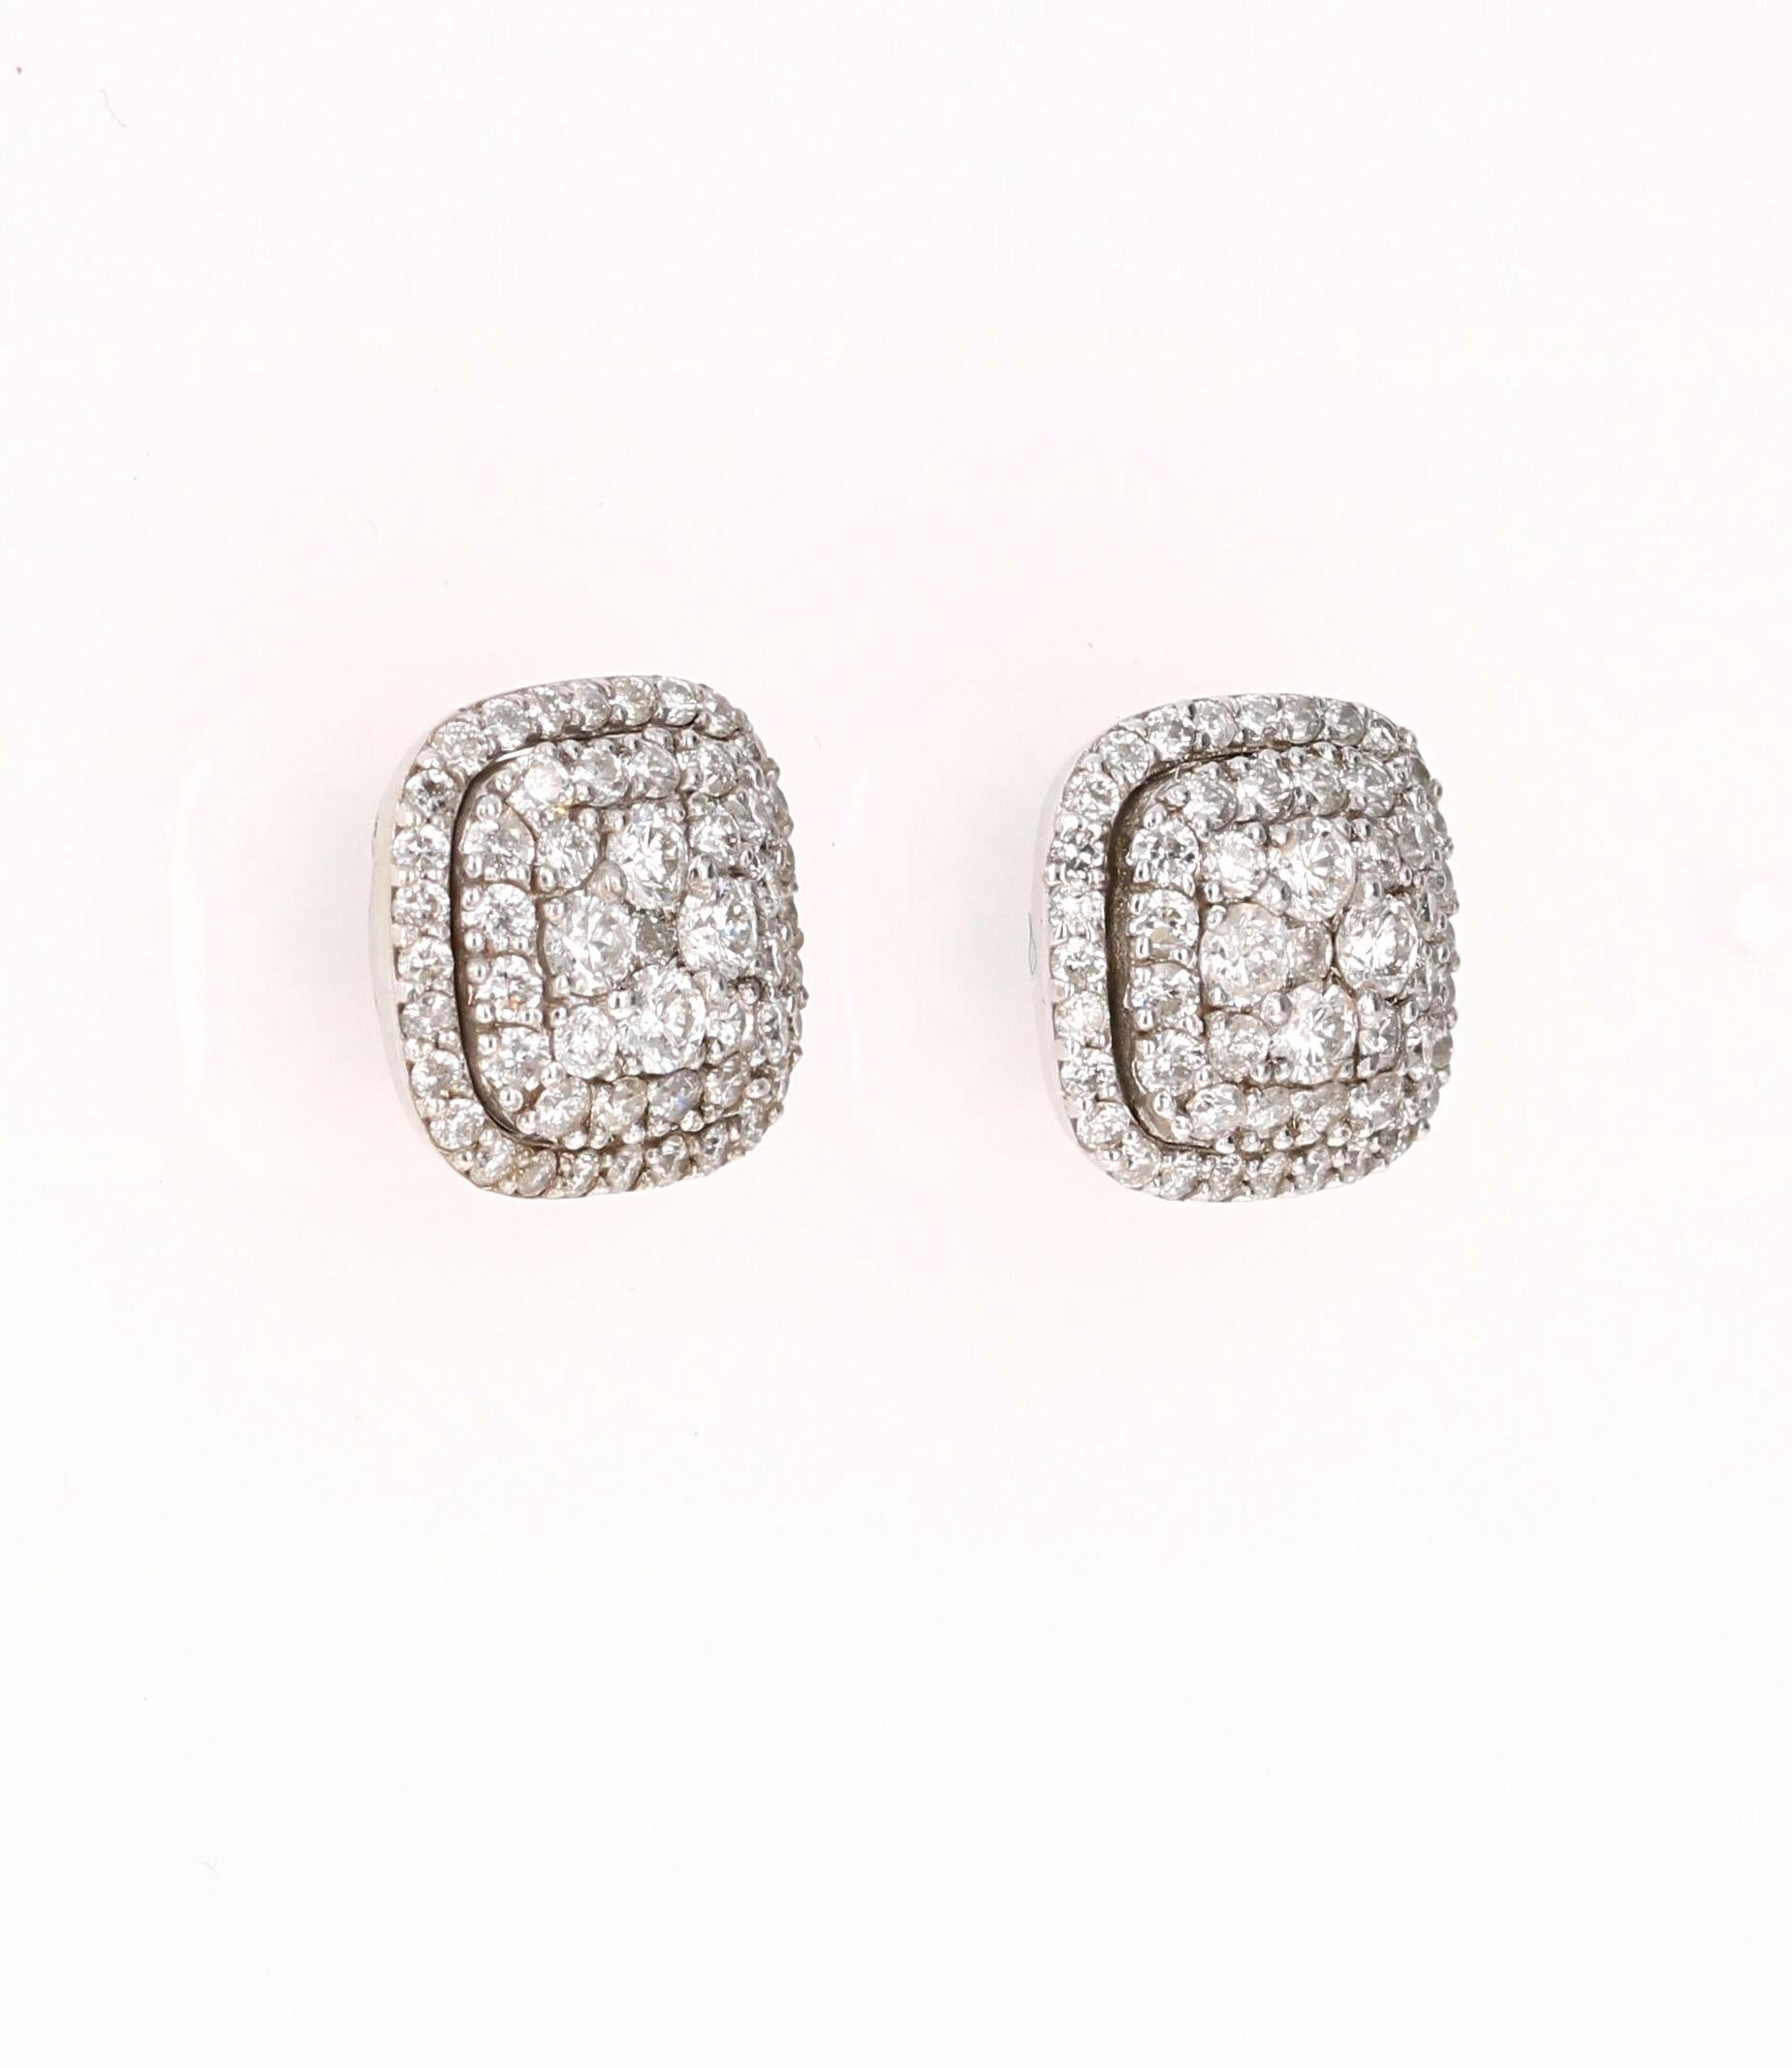 
0.94 Carat Round Diamond 14K White Gold Cluster Stud Earrings!

This beautifully designed pair of cluster diamond stud earrings have 106 Round Cut Diamonds that weigh 0.94 Carats. The Clarity is SI1 and Color is F. 

The backing of the earring is a